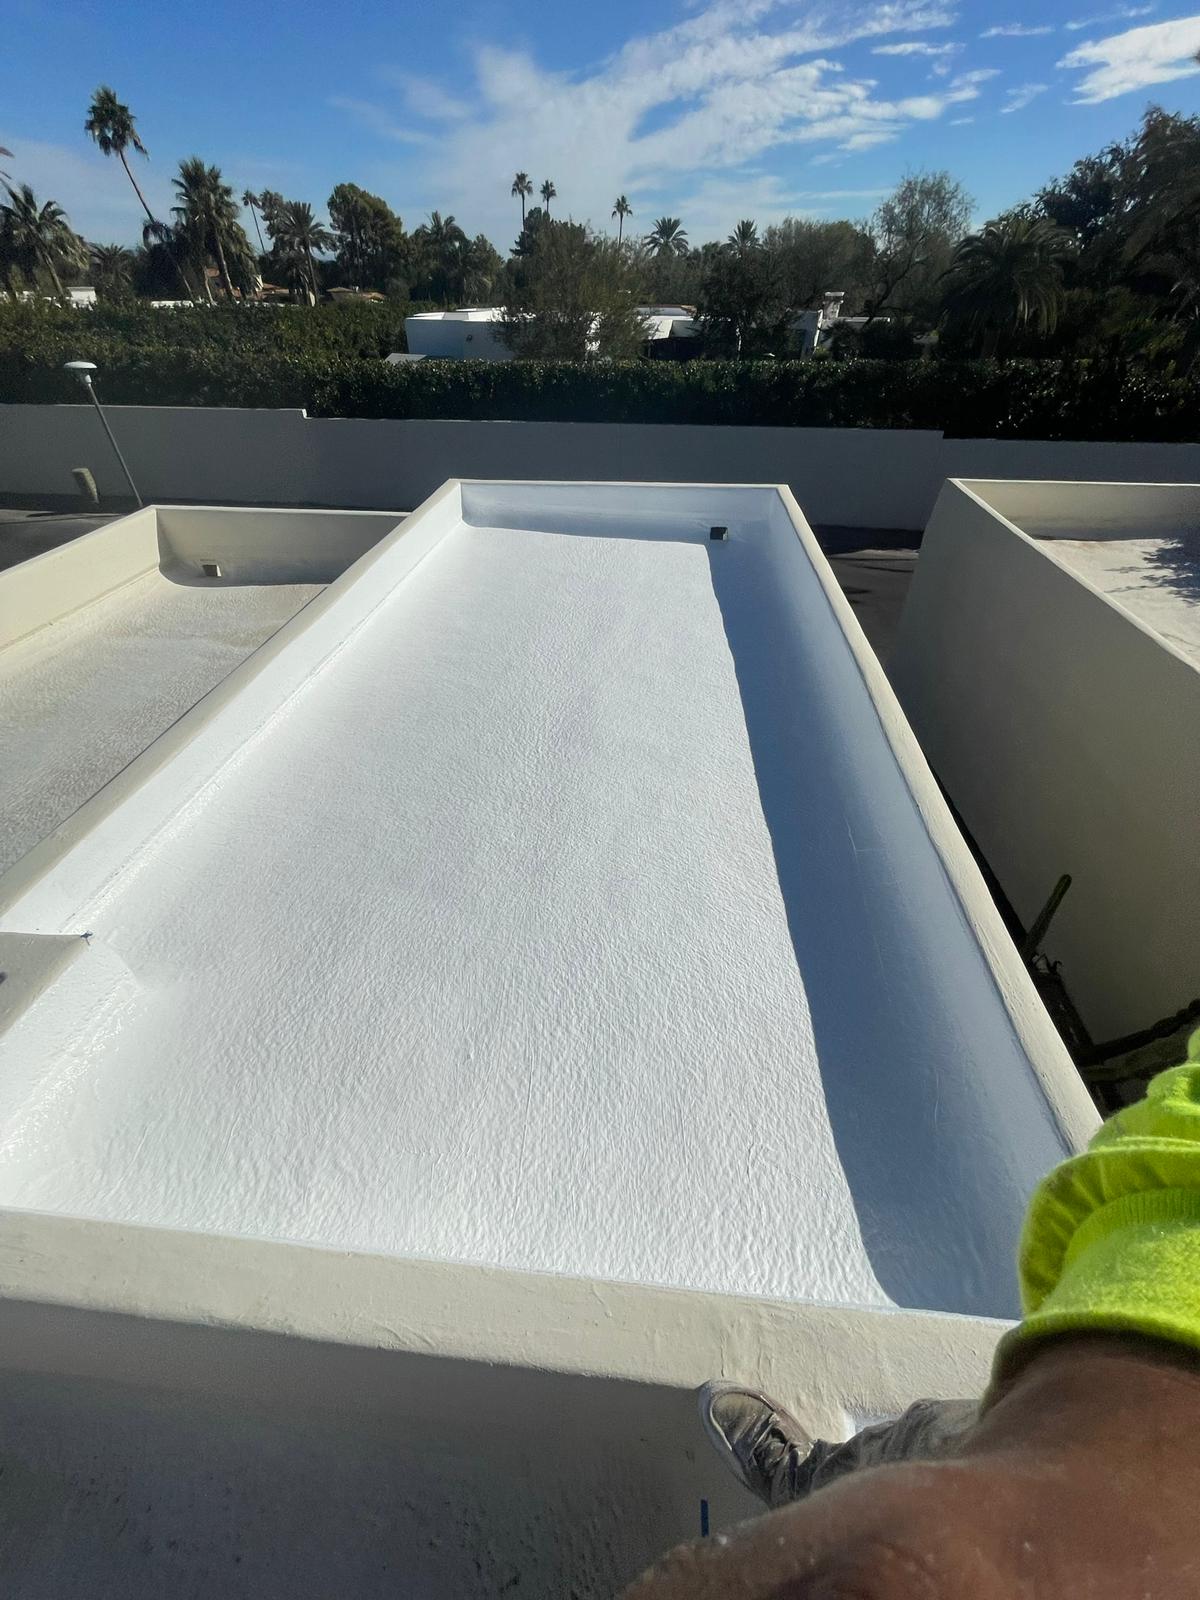 A skilled worker sprays coating over foam insulation on a flat roof in Desert Ridge, ensuring top-notch energy efficiency.